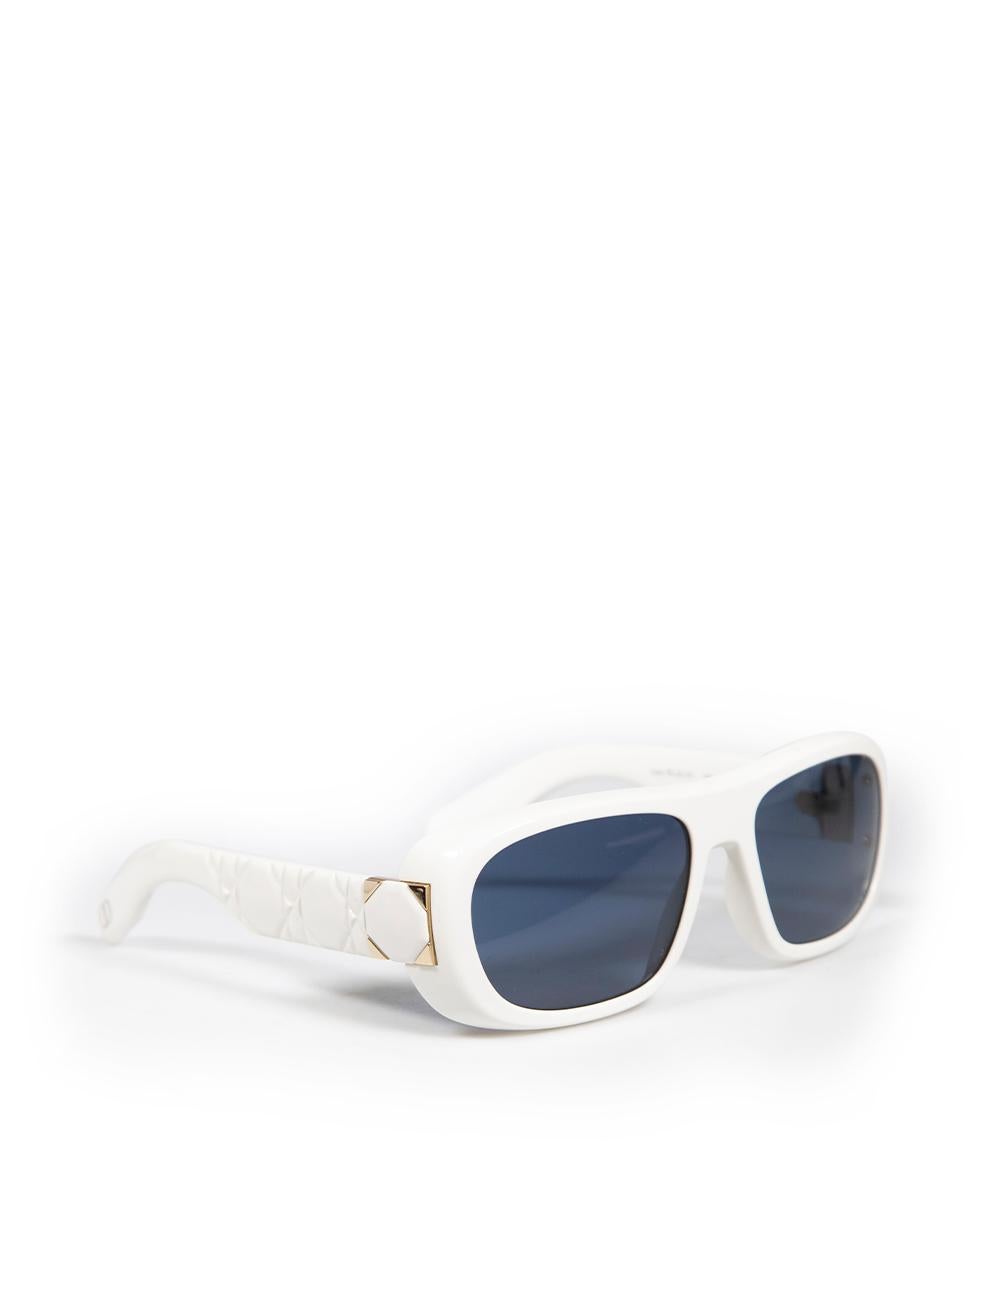 CONDITION is Never worn, with tags. No visible wear to sunglasses is evident on this new Dior designer resale item. These sunglasses come with original case, box, and lens cleaner.
 
 
 
 Details
 
 
 White
 
 Acetate
 
 Sunglasses
 
 Square frame
